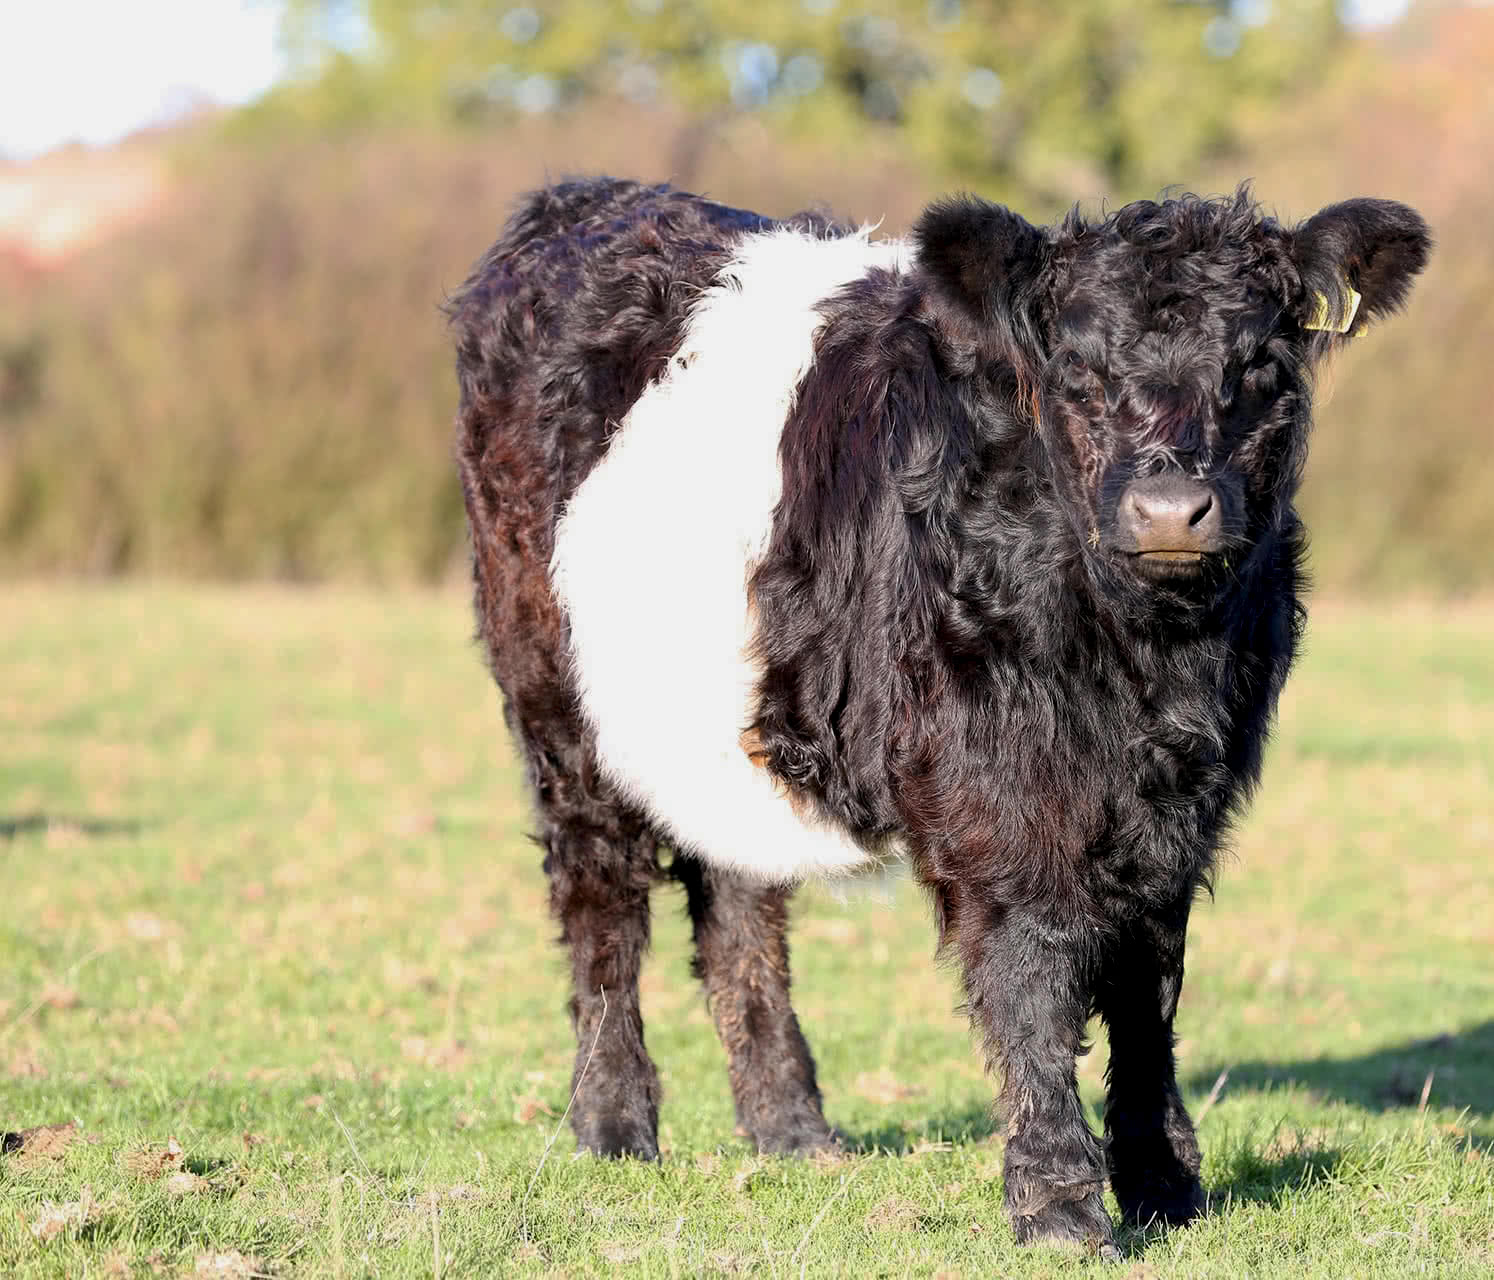 Belted Galloway cows